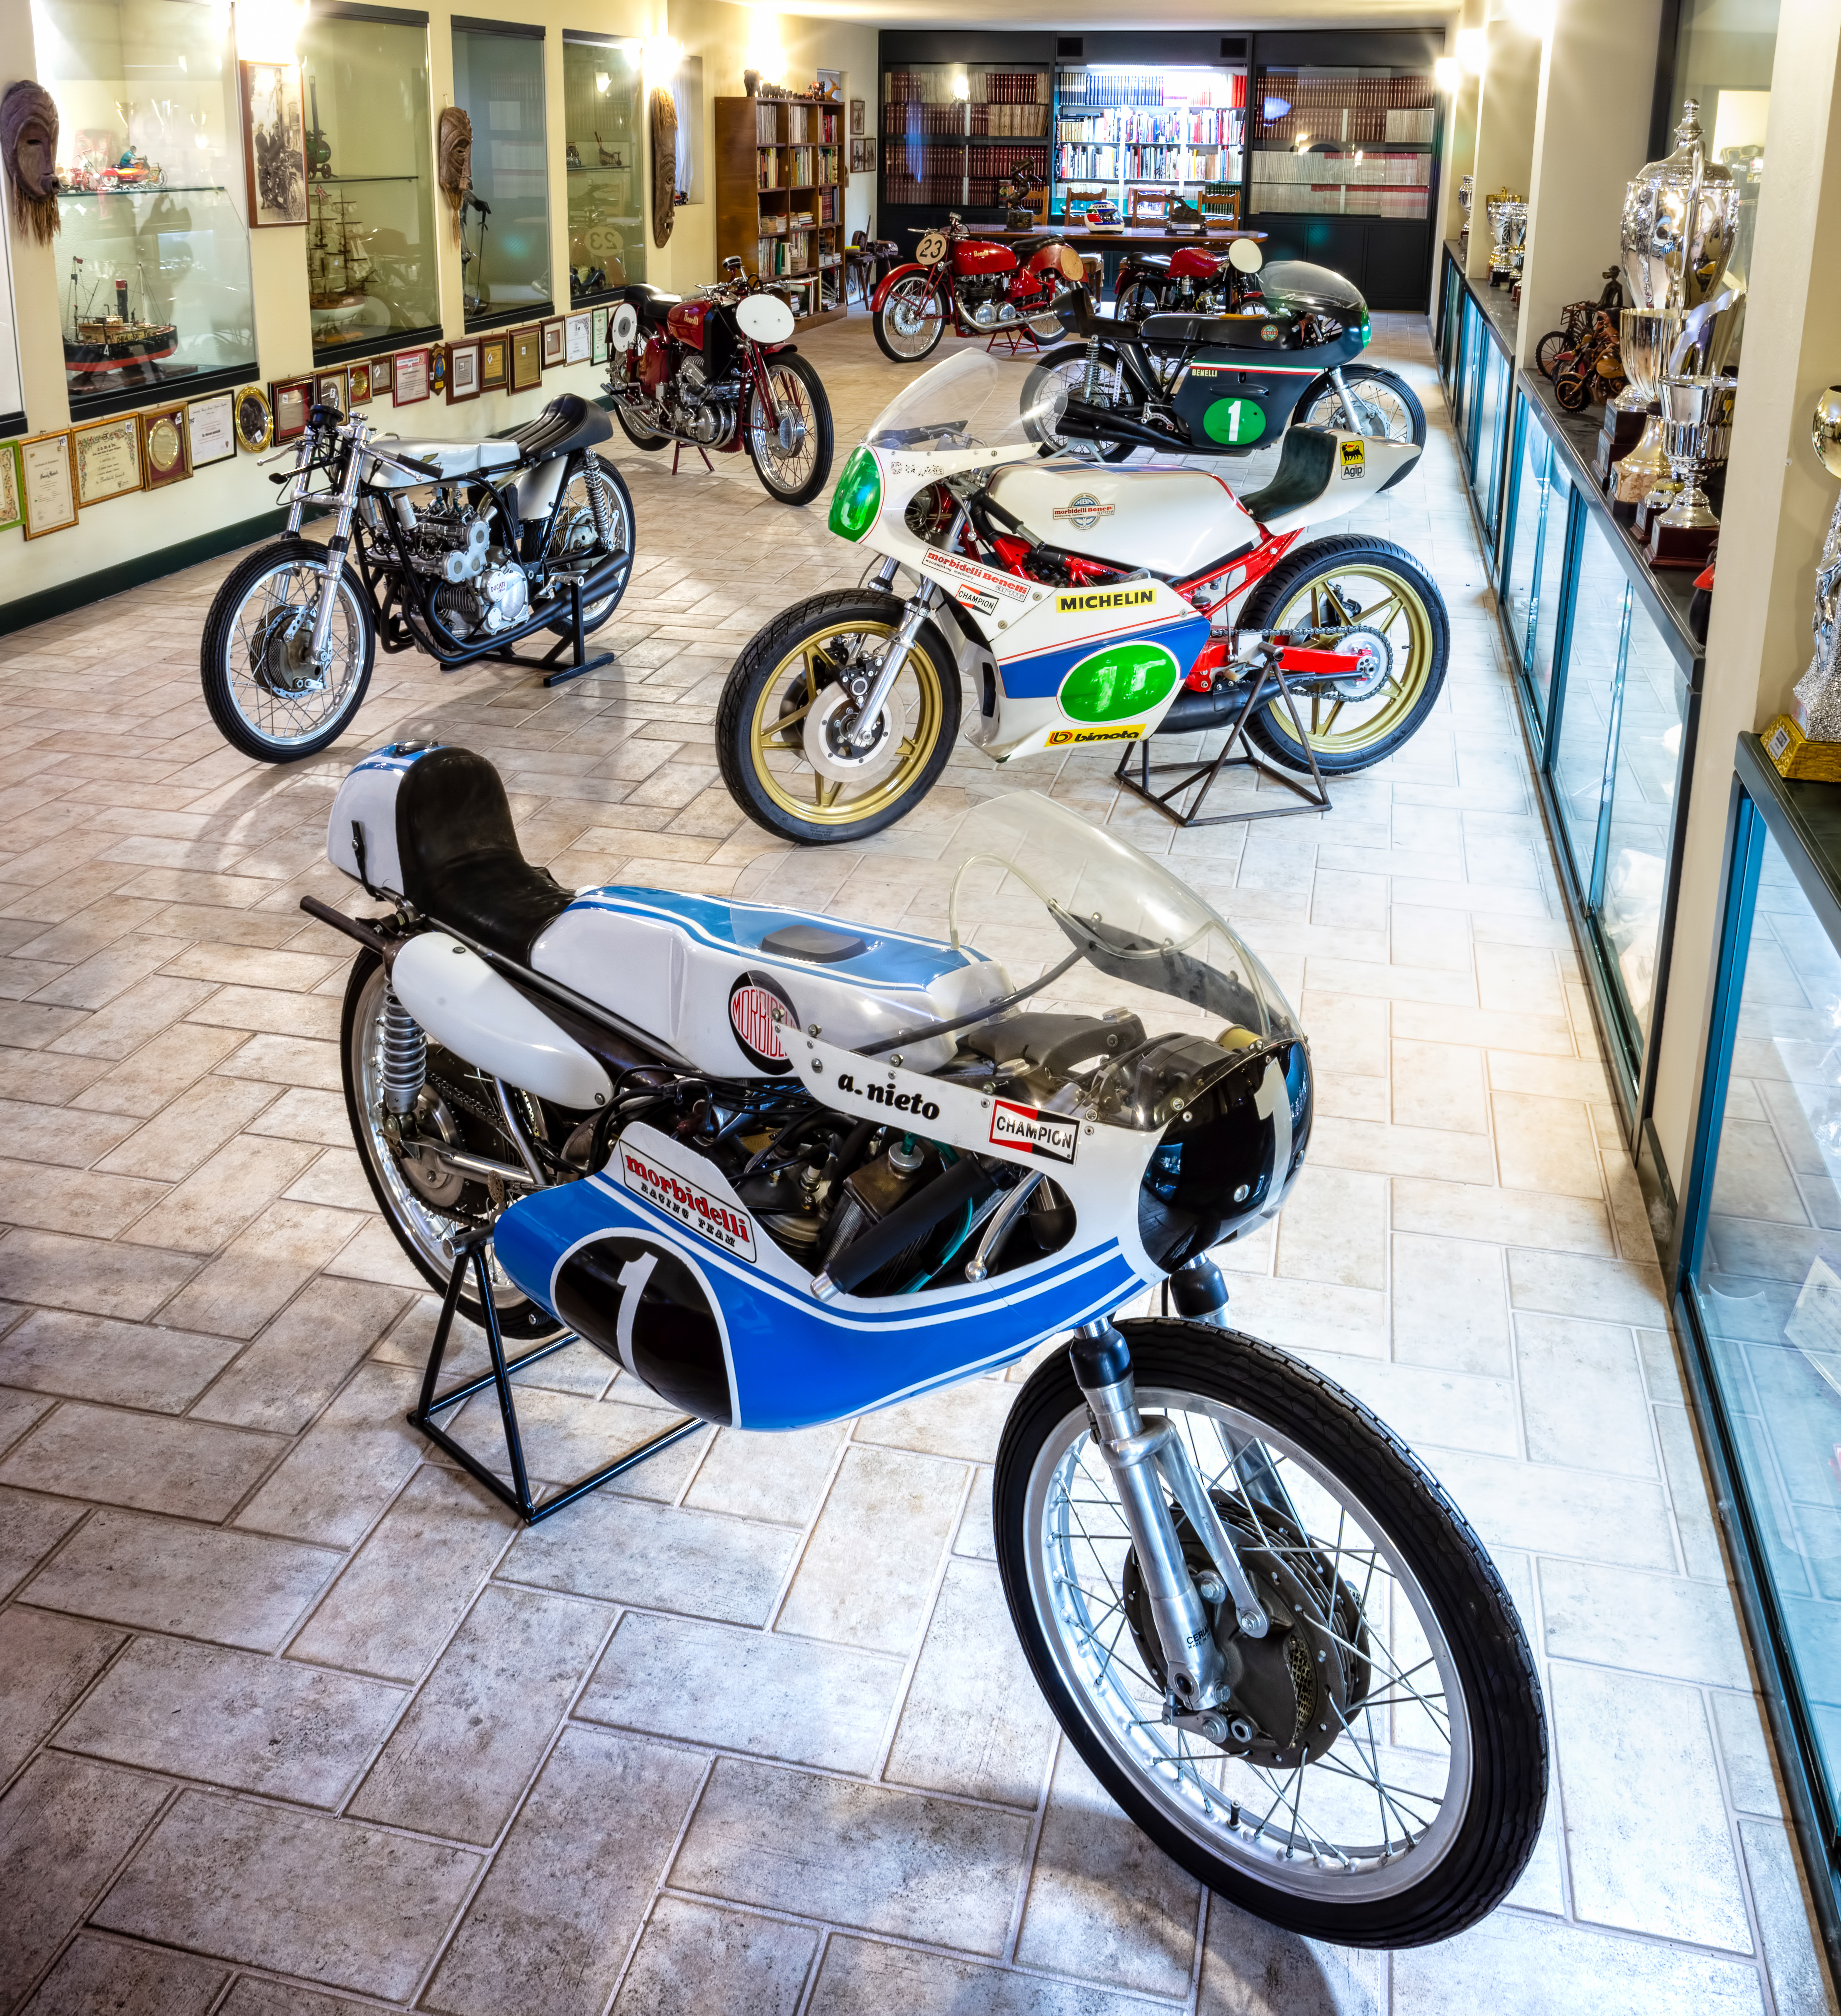 Motorcycle museum, Morbidelli Motorcycle Museum collection highlights Bonhams’ Stafford docket, ClassicCars.com Journal